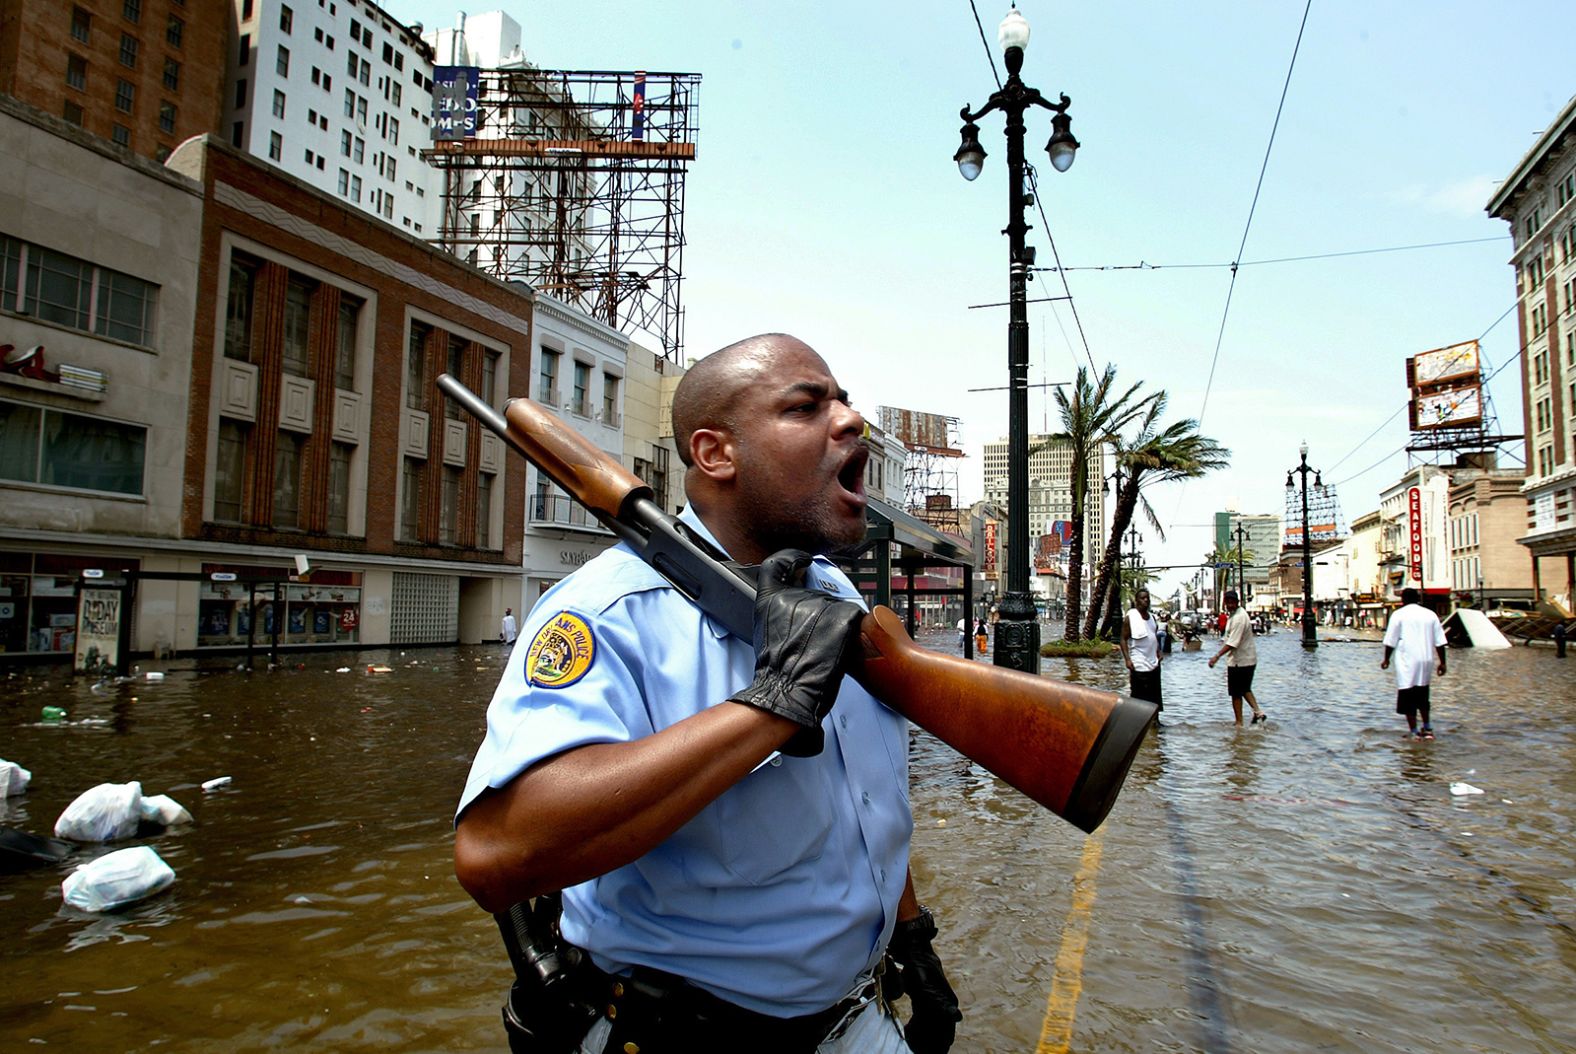 New Orleans police officer Mark Wilson yells at people in stores looters on Canal Street. In Katrina's aftermath, many questioned whether some people accused of looting were just people scavenging for the supplies they needed to survive.